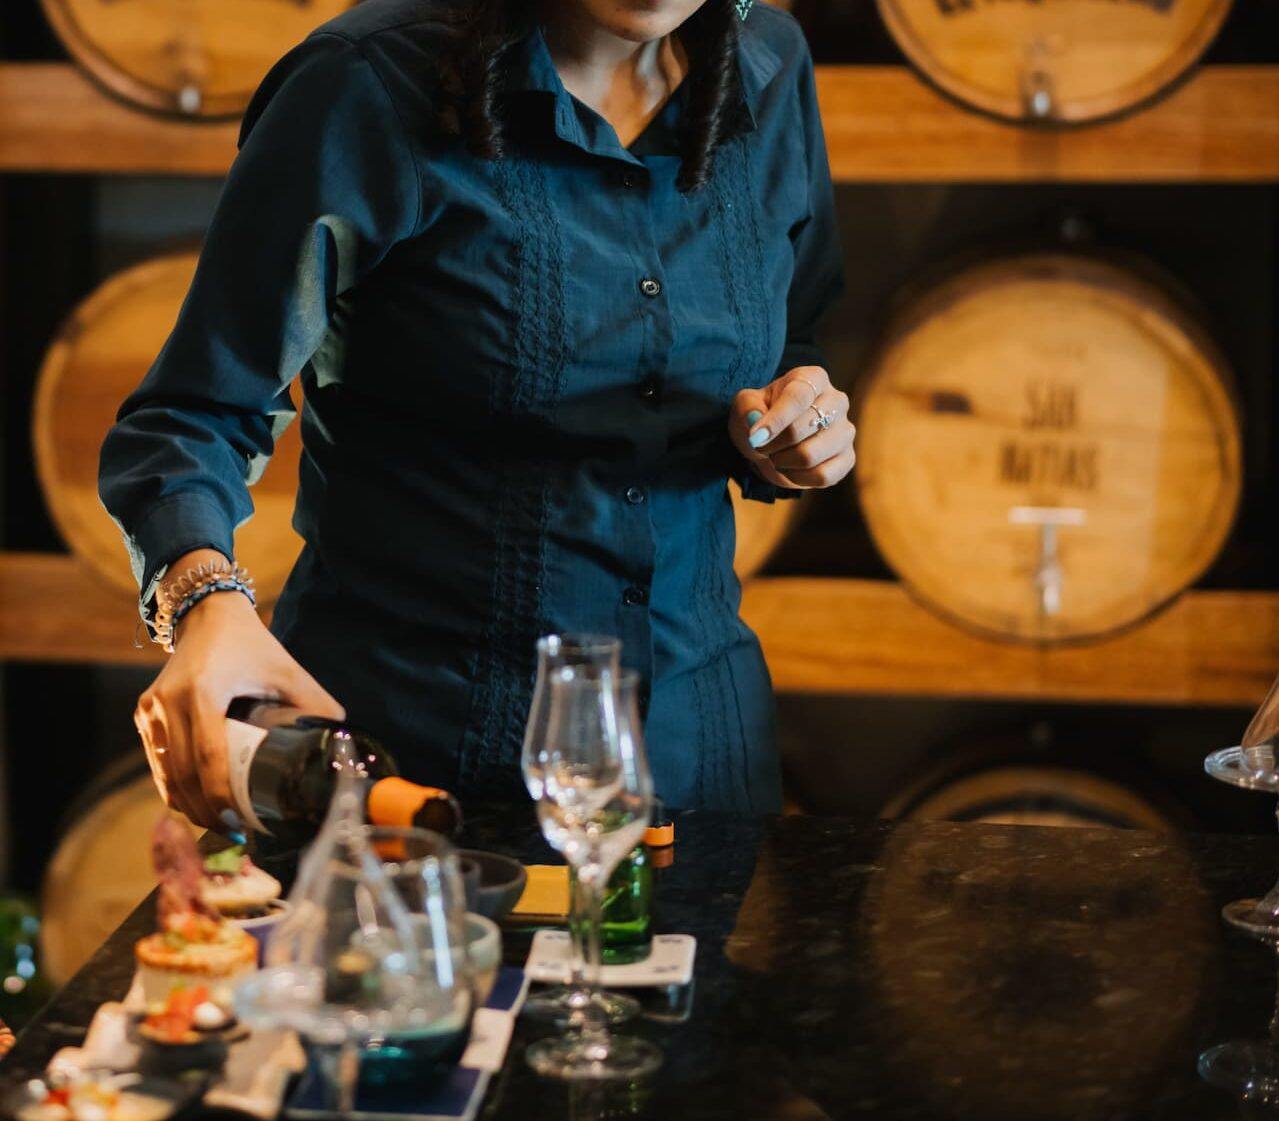 A lady serving wine in glass